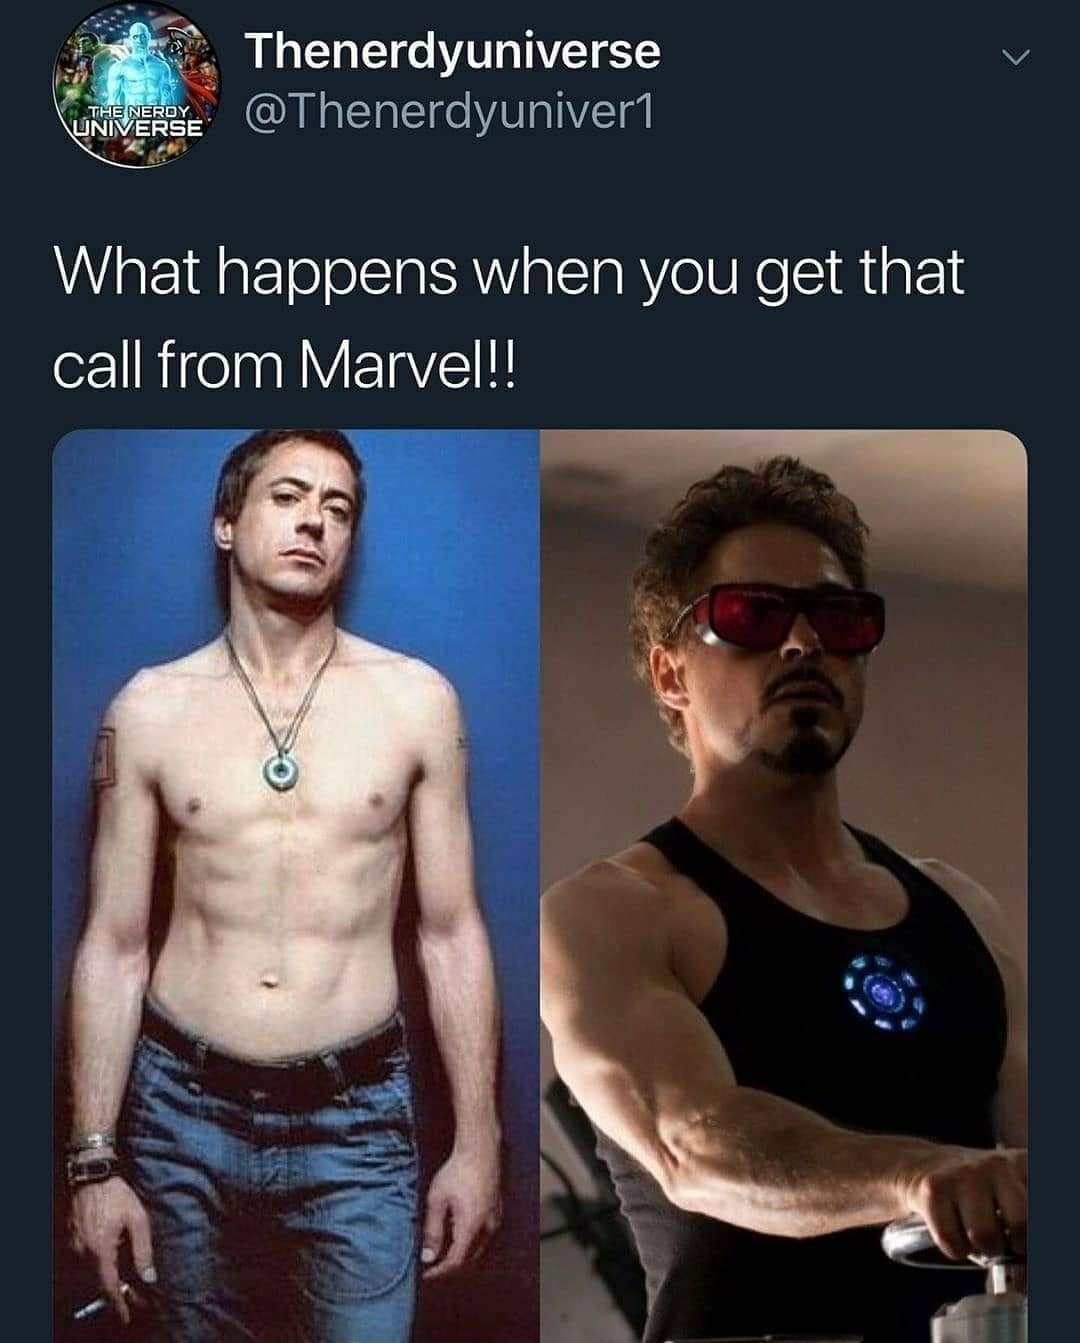 robert downey junior shirtless - Thenerdyuniverse The Nerdy Universe Universe What happens when you get that call from Marvel!!